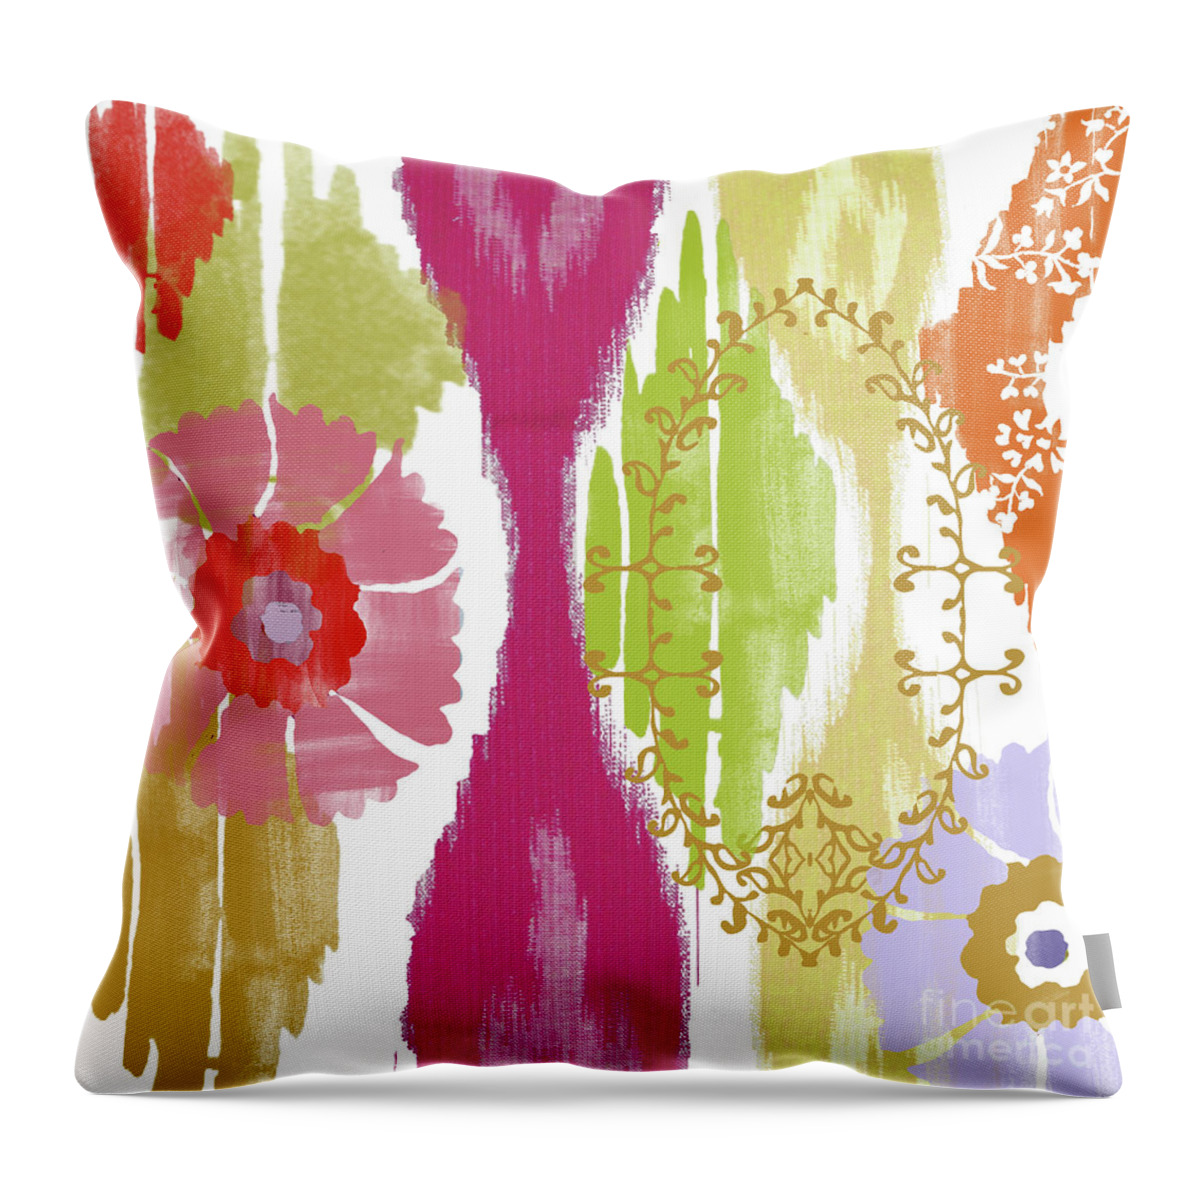 Ikat Throw Pillow featuring the painting Chanda II by Mindy Sommers